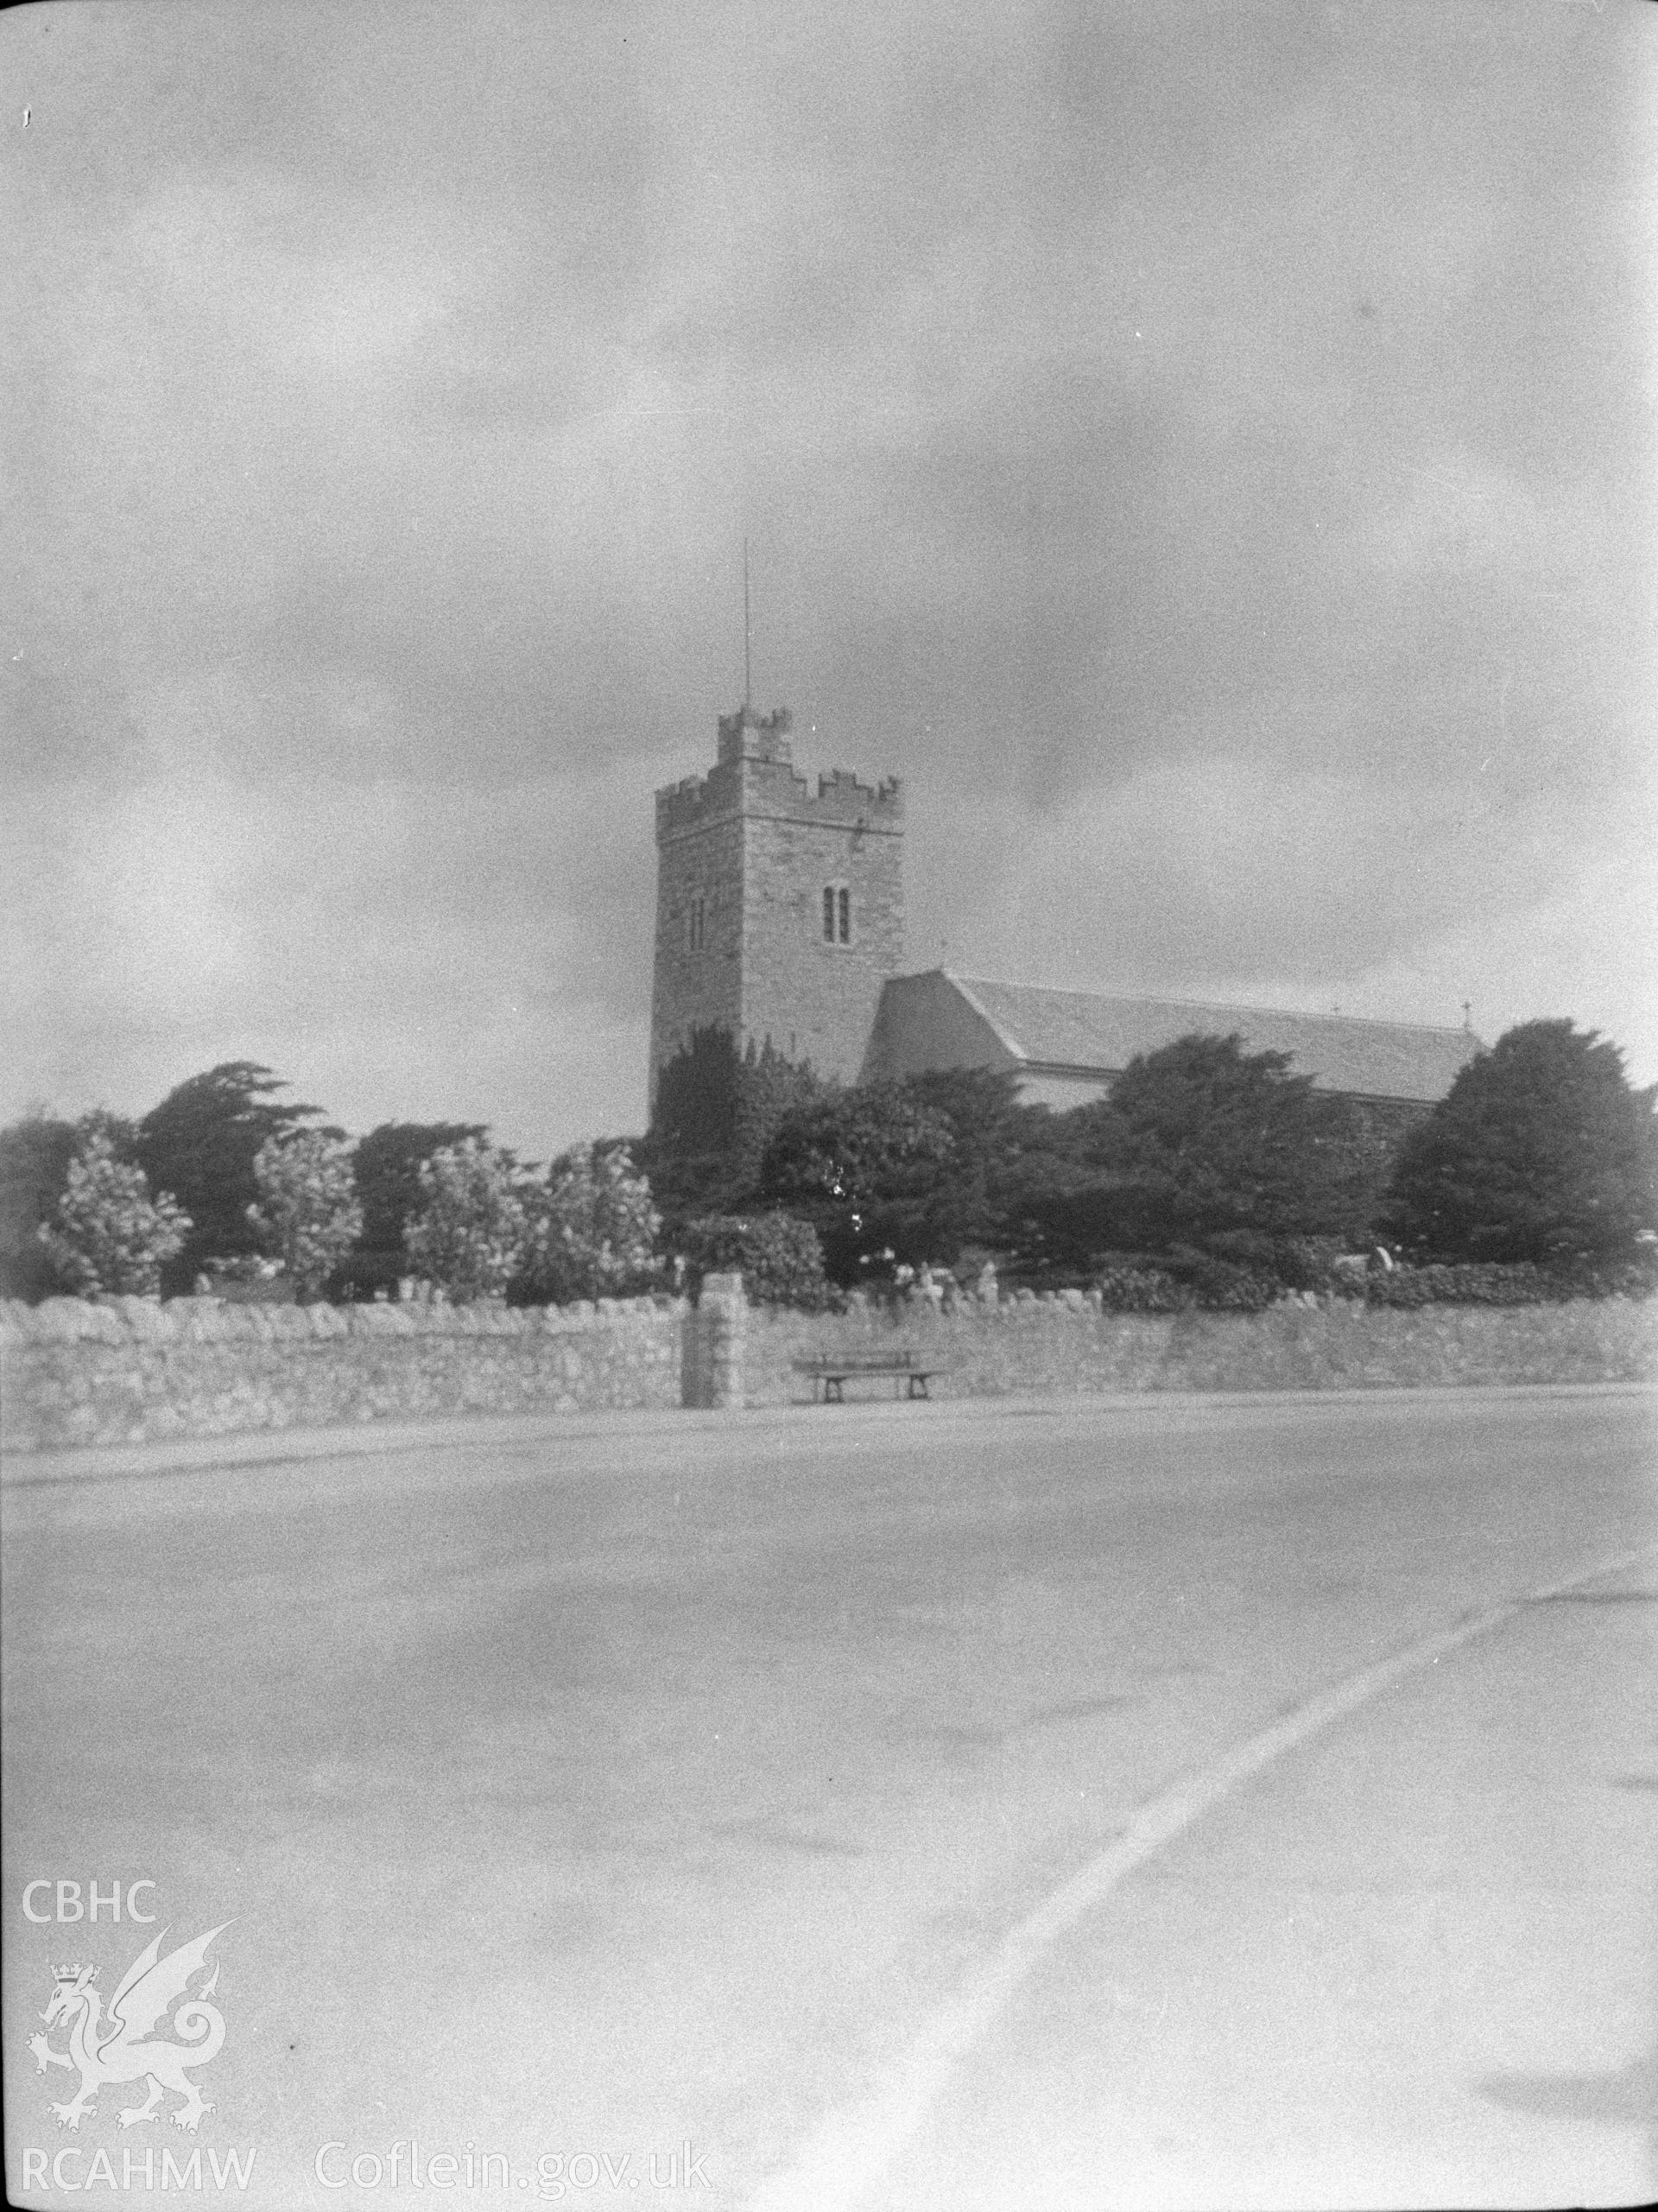 Digital copy of a nitrate negative showing exterior view of St Trillo's Church, Llandrillo yn Rhos, taken from across the road. From the National Building Record Postcard Collection.